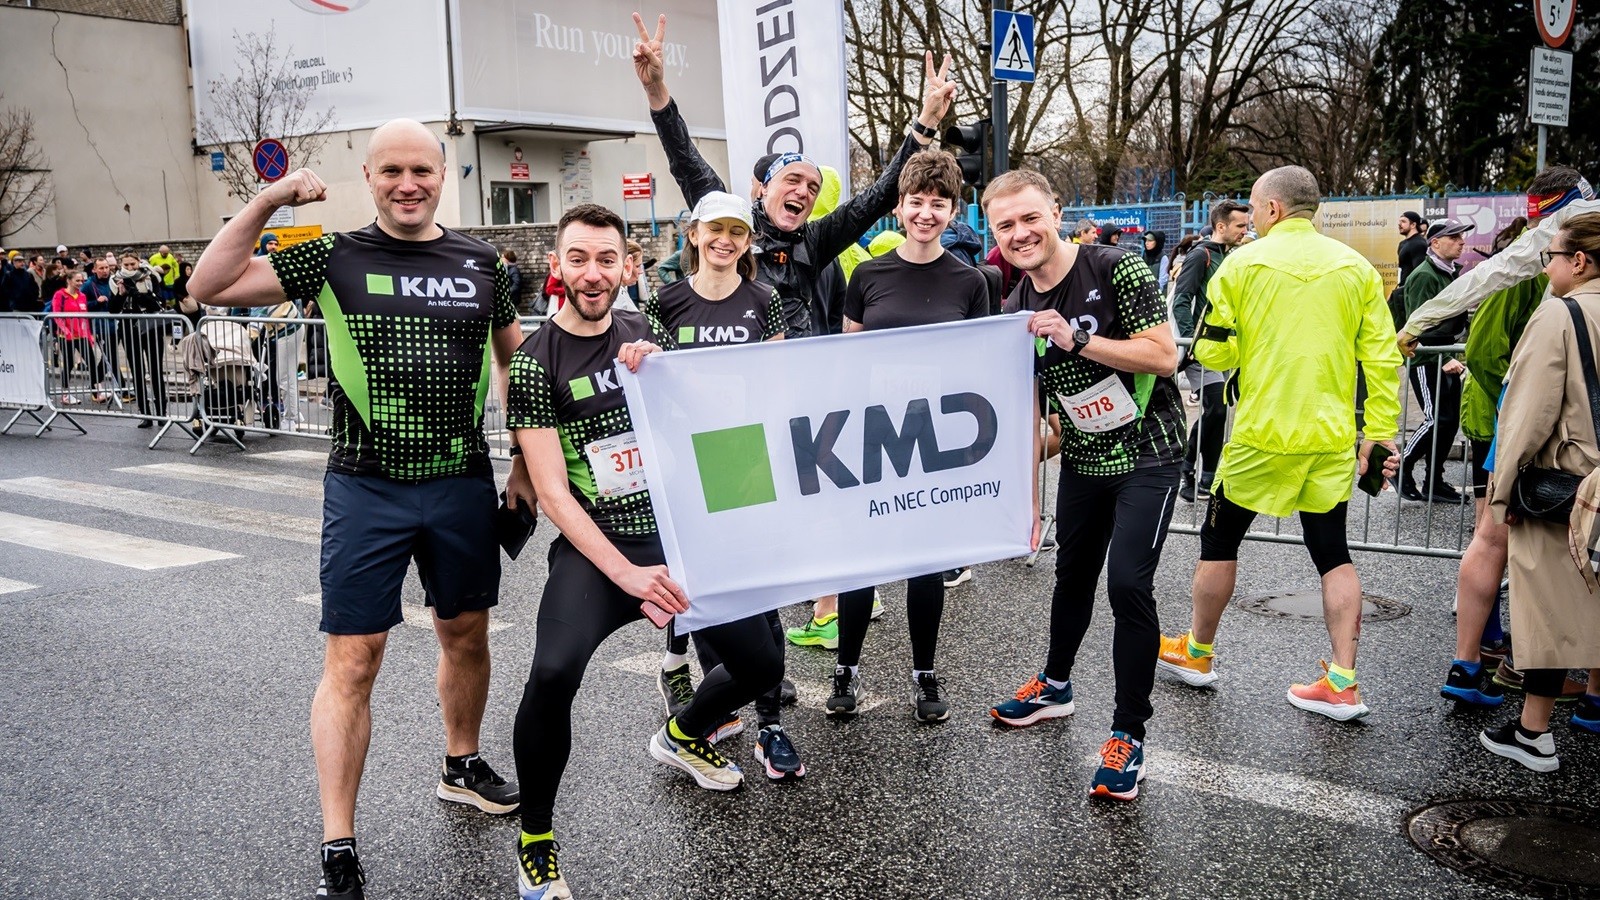 KMD Poland employees in sports attire holding up a KMD sign at a corporate running event